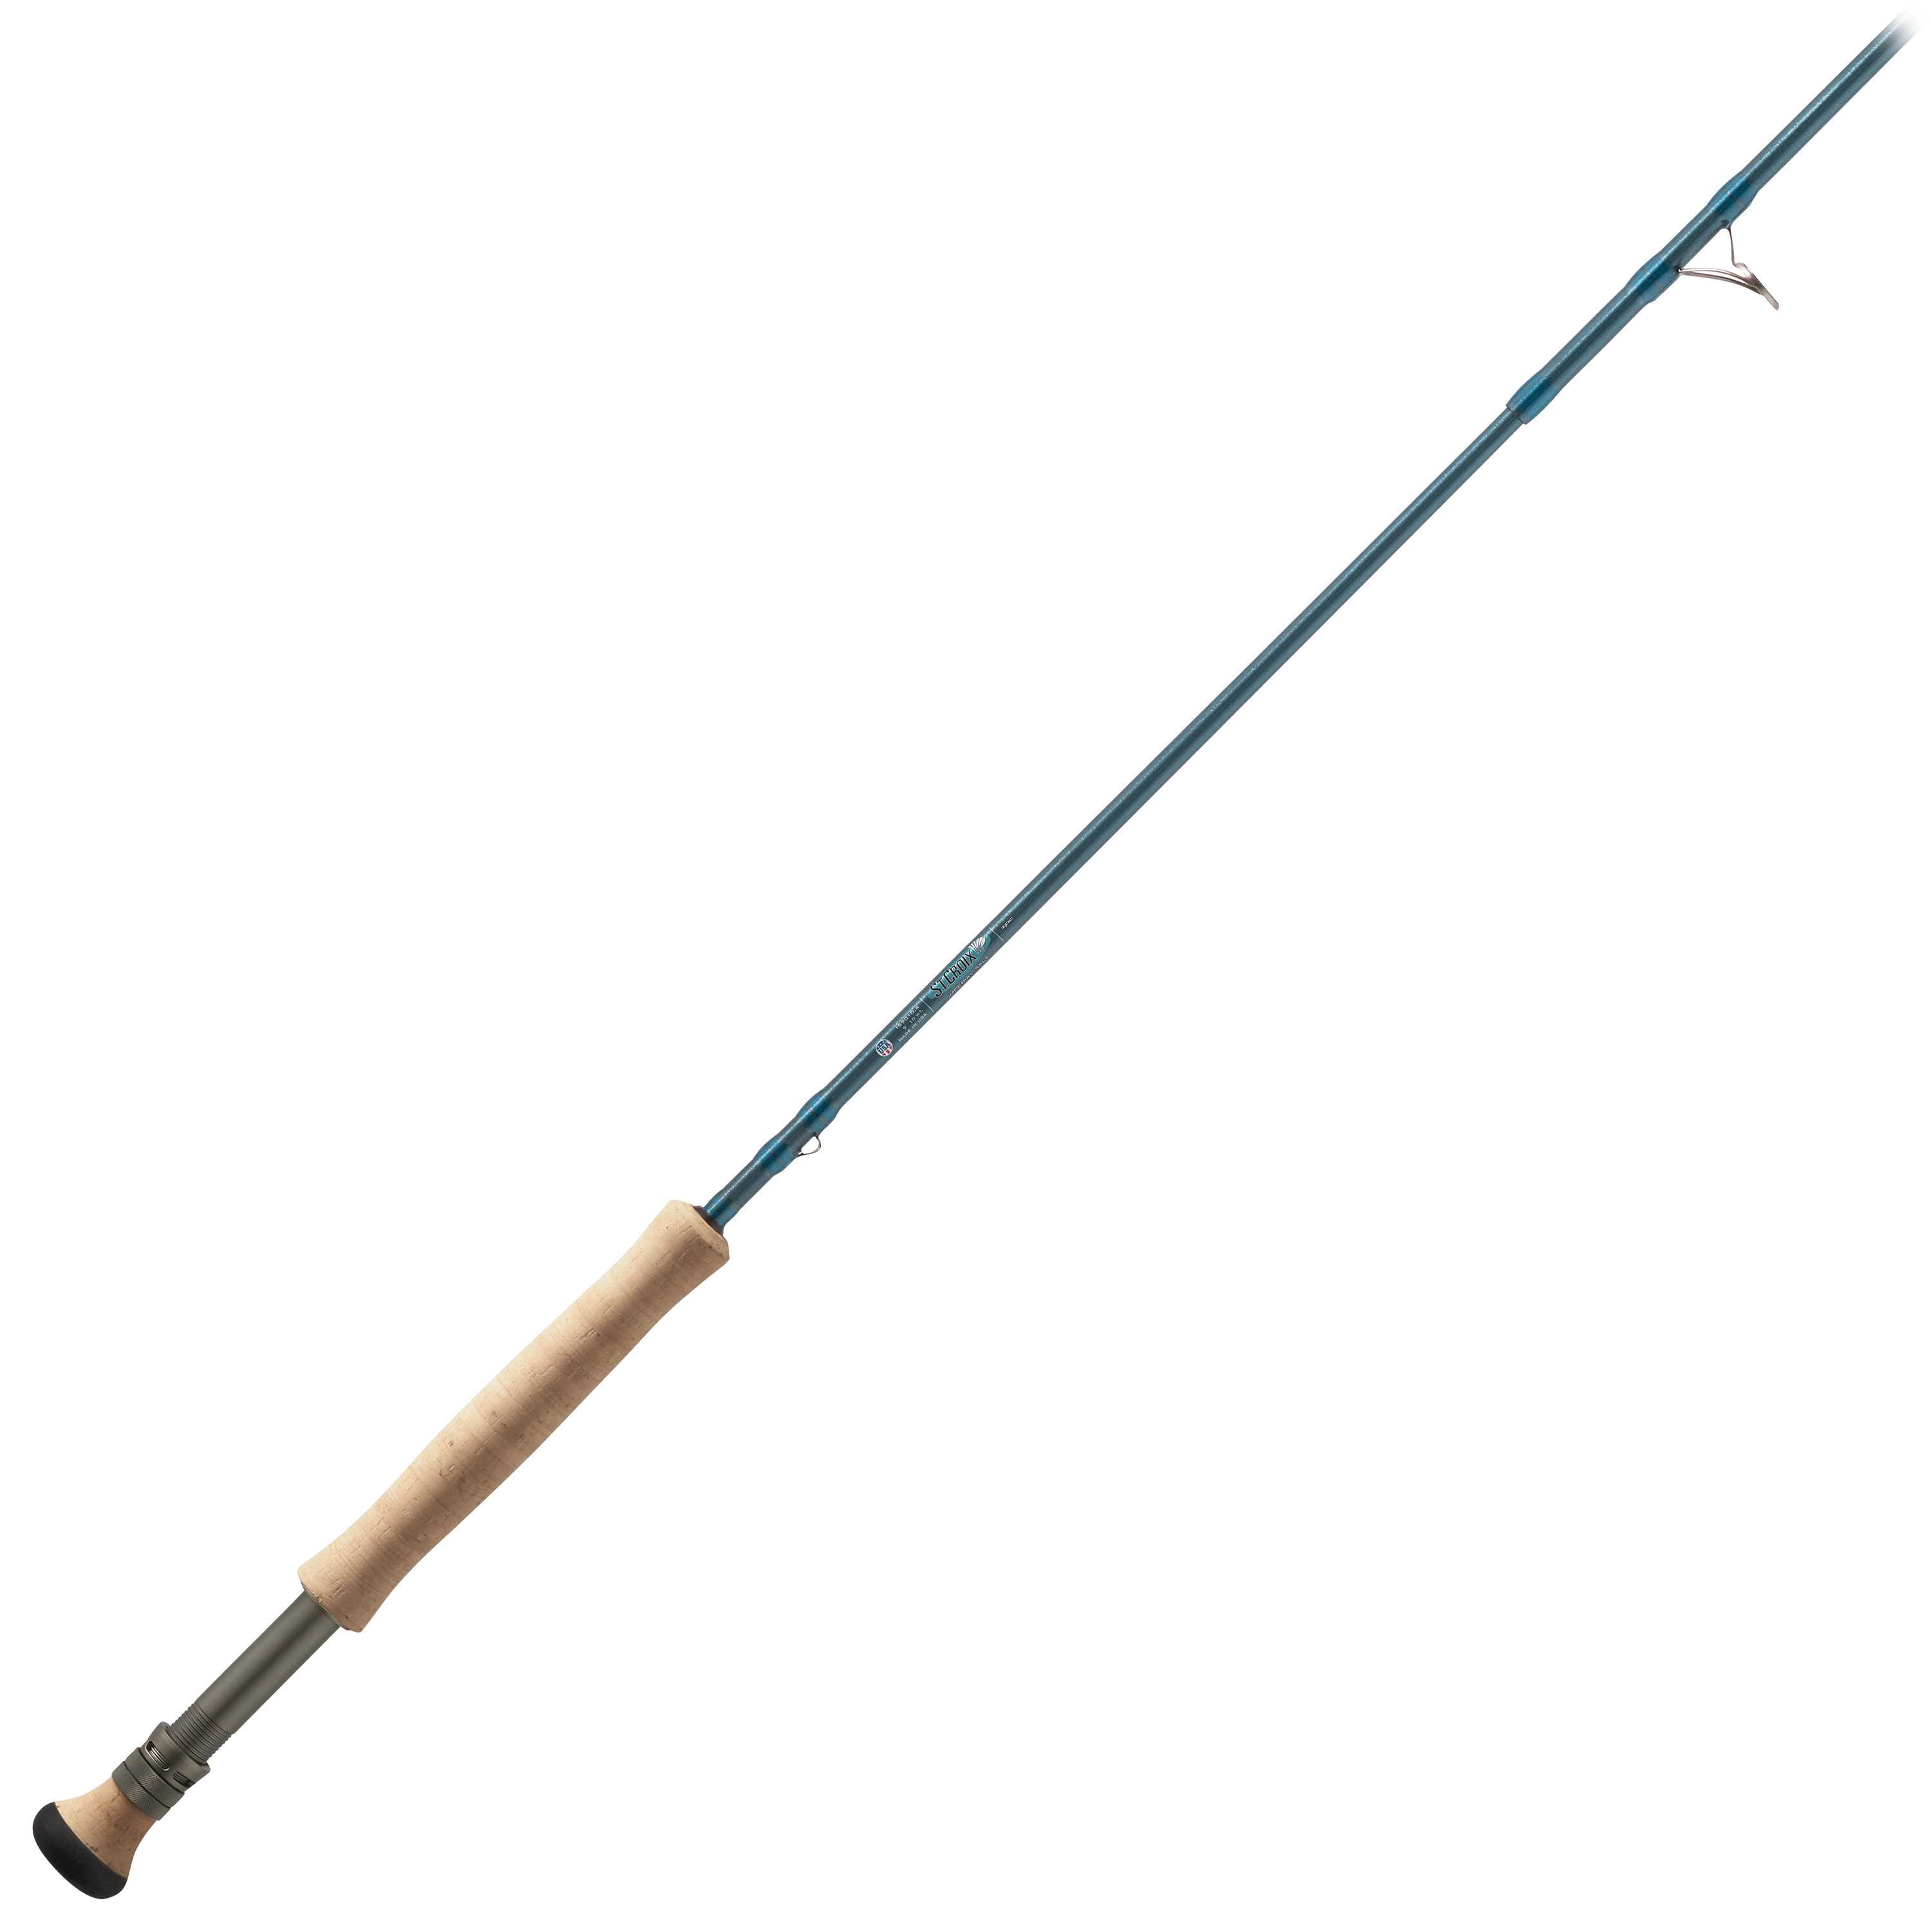 St. Croix Imperial Salt Fly Rod - IS908.4